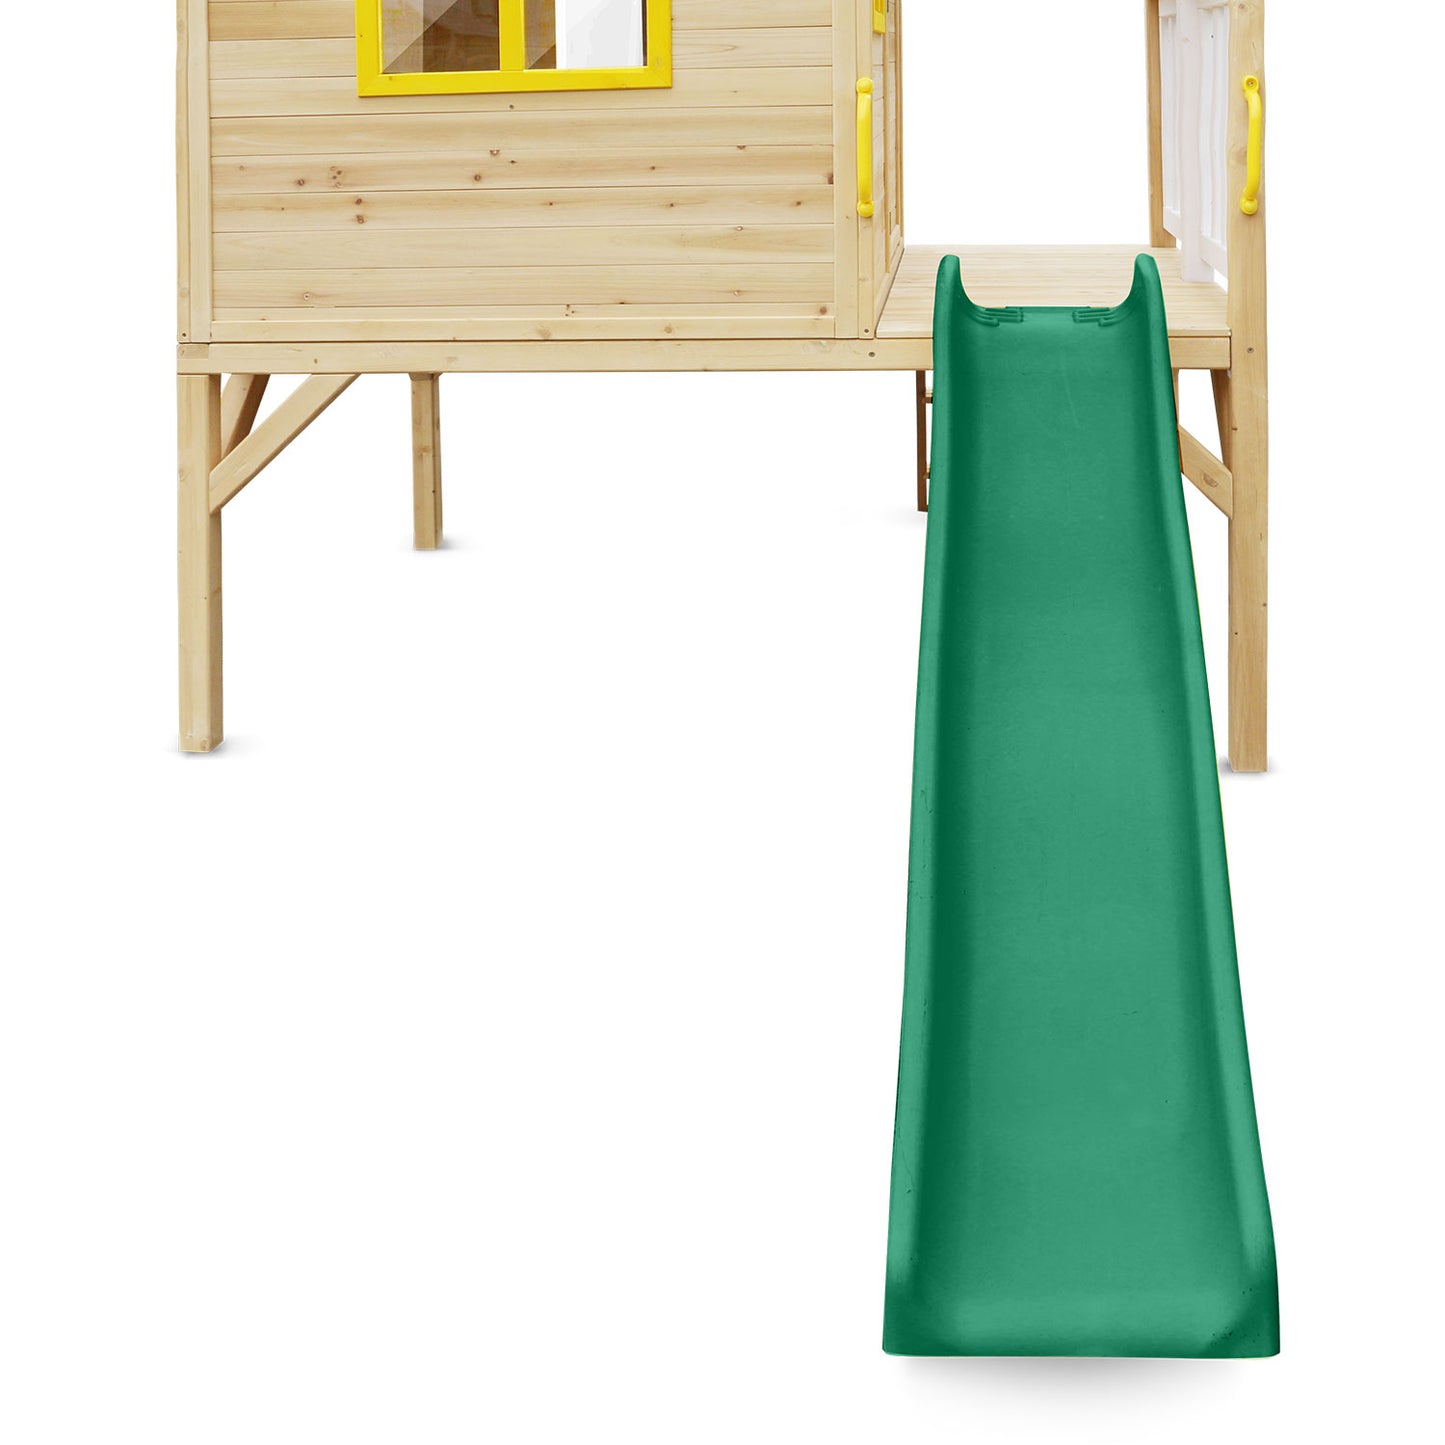 Lifespan Kids Archie Cubby House with Green Slide